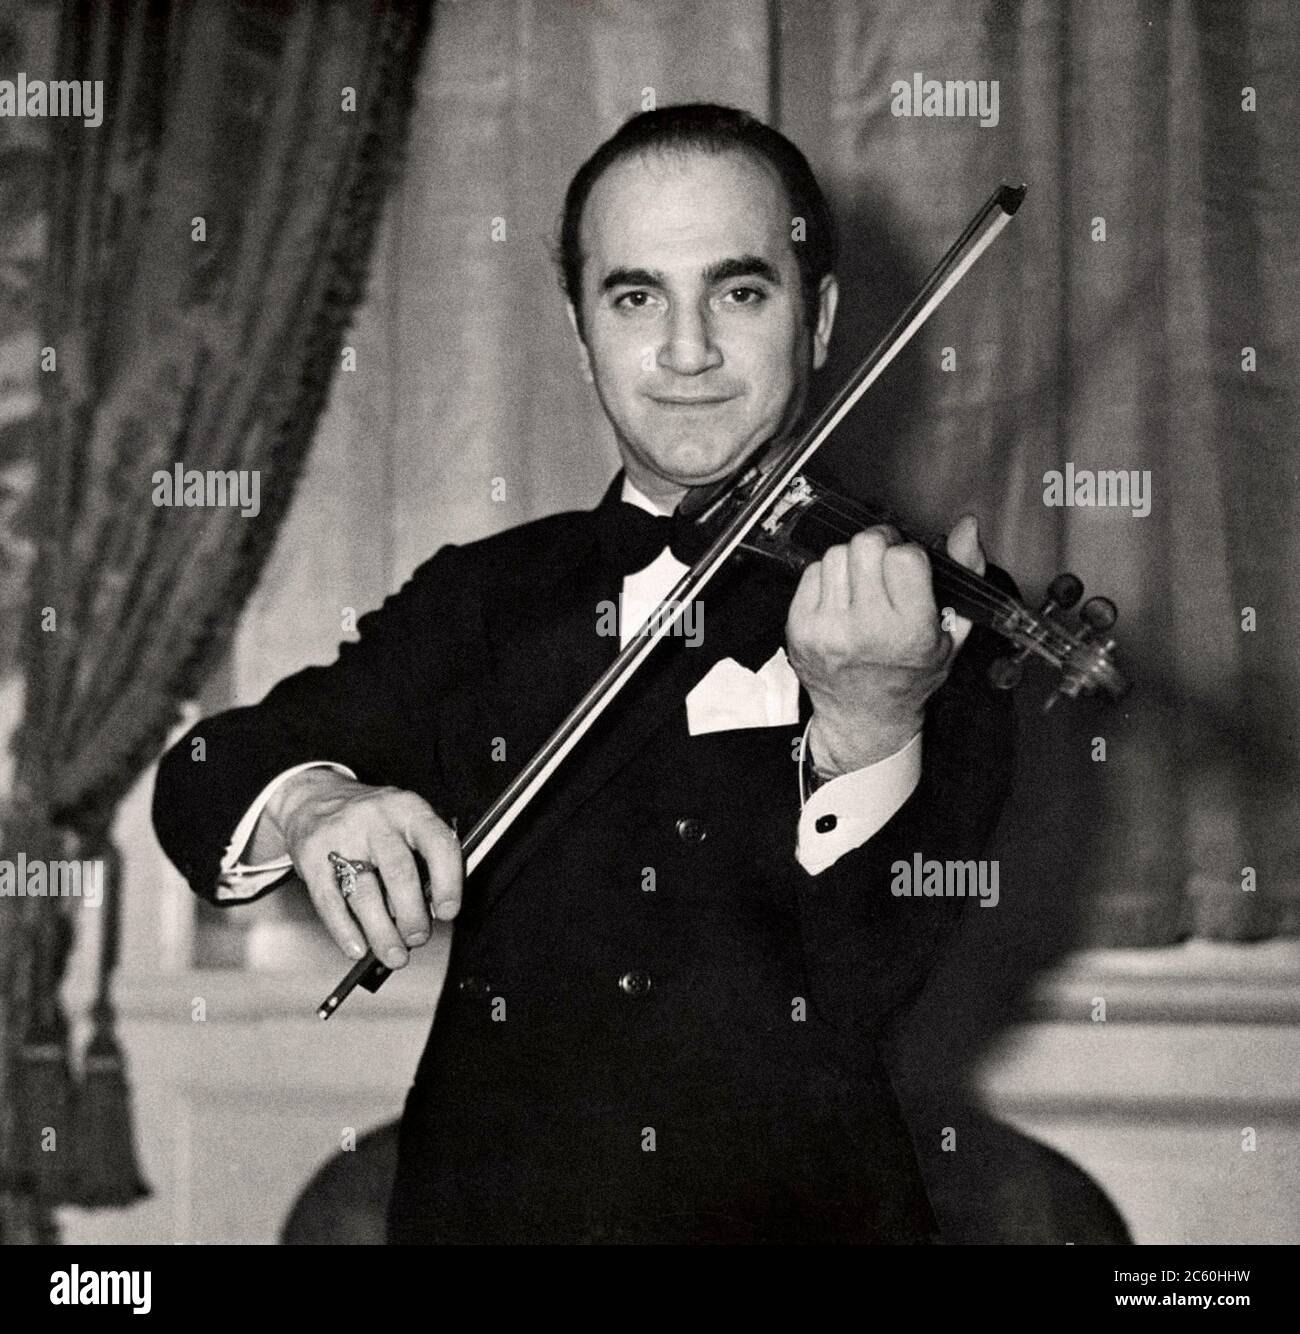 'Folding violin', USA 1938. Mr. David Rubinov, one of the most famous American violinists, came up with the idea of how to combine fishing and daily e Stock Photo